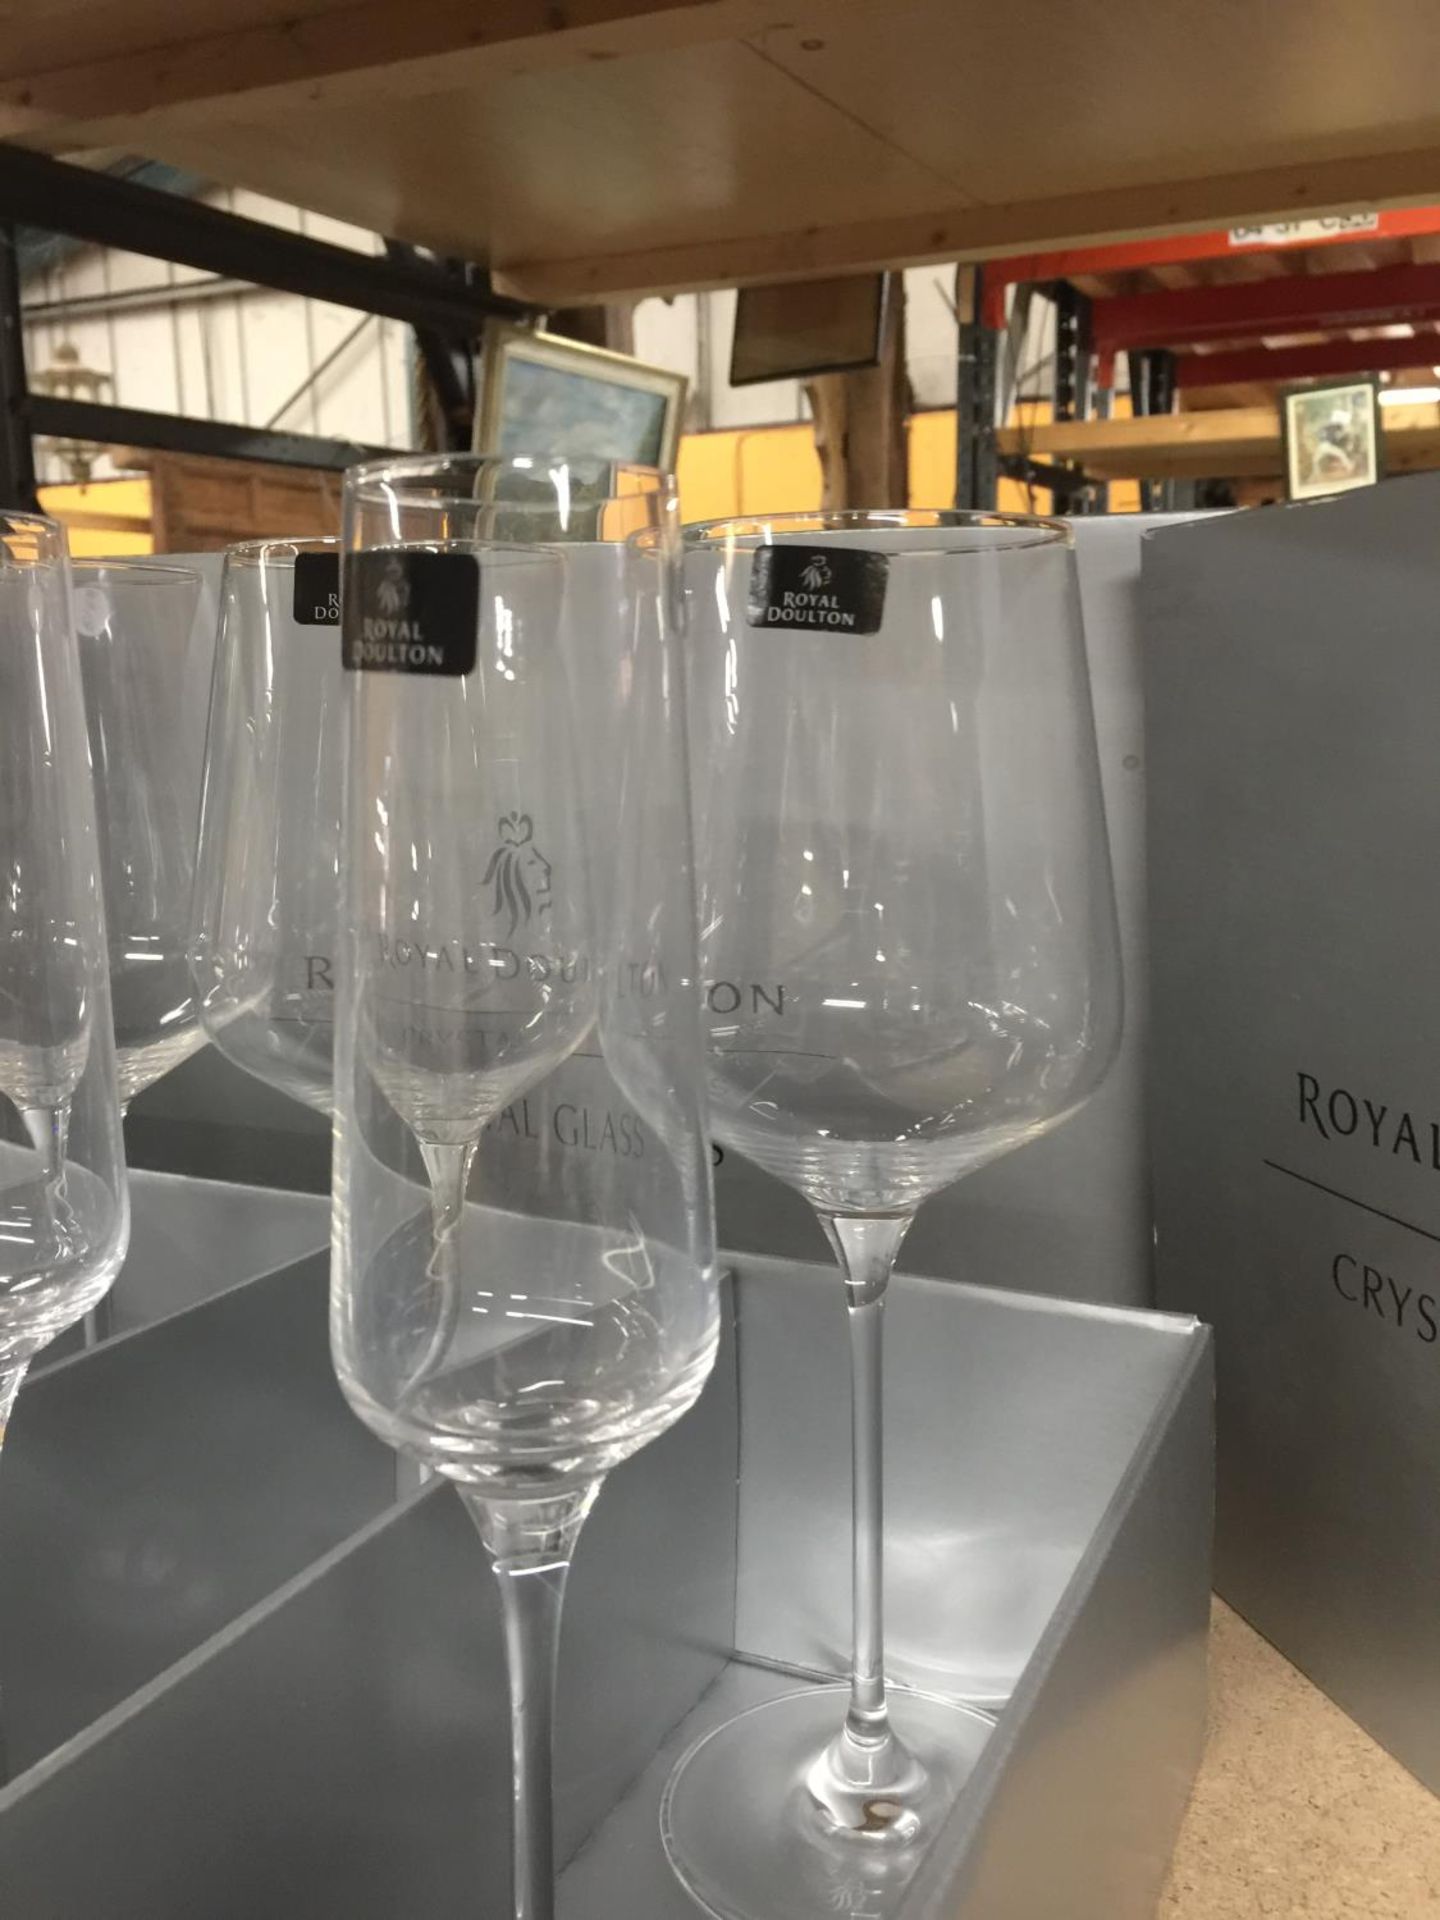 EIGHT BOXED ROYAL DOULTON GLASSES TO INCLUDE FOUR LARGE WINE GLASSES AND FOUR FLUTES - Image 2 of 3